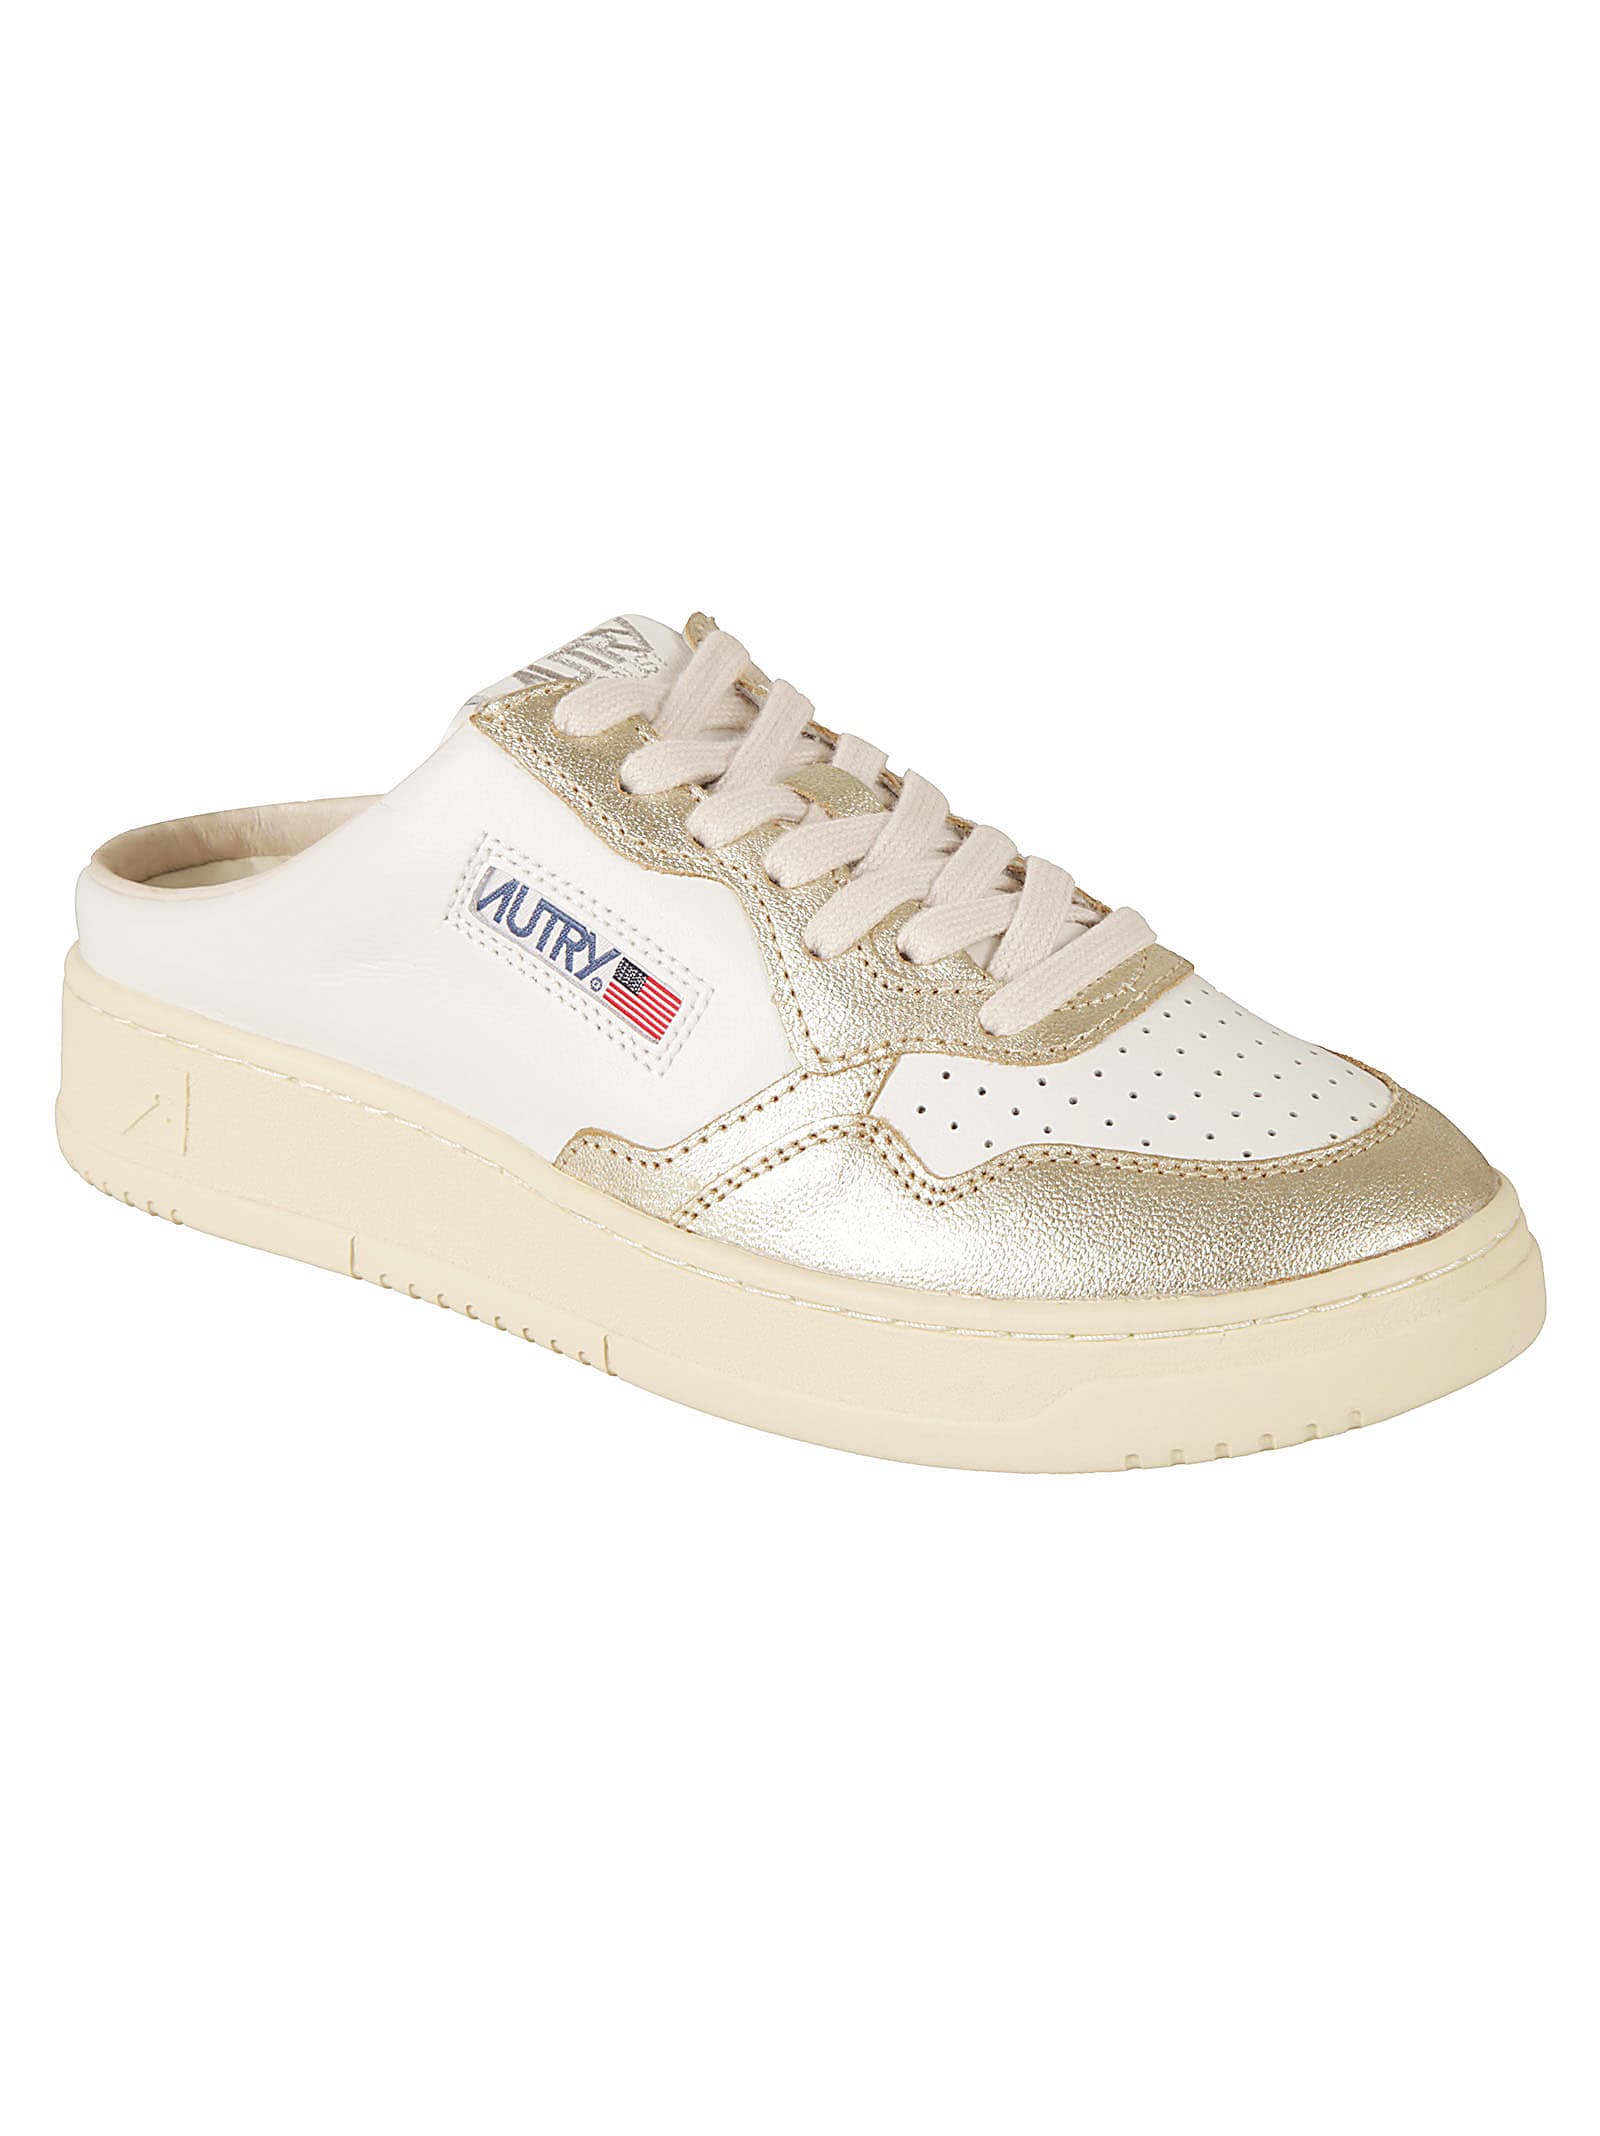 Shop Autry Logo Patched Low Sneakers Mule In White/platinum